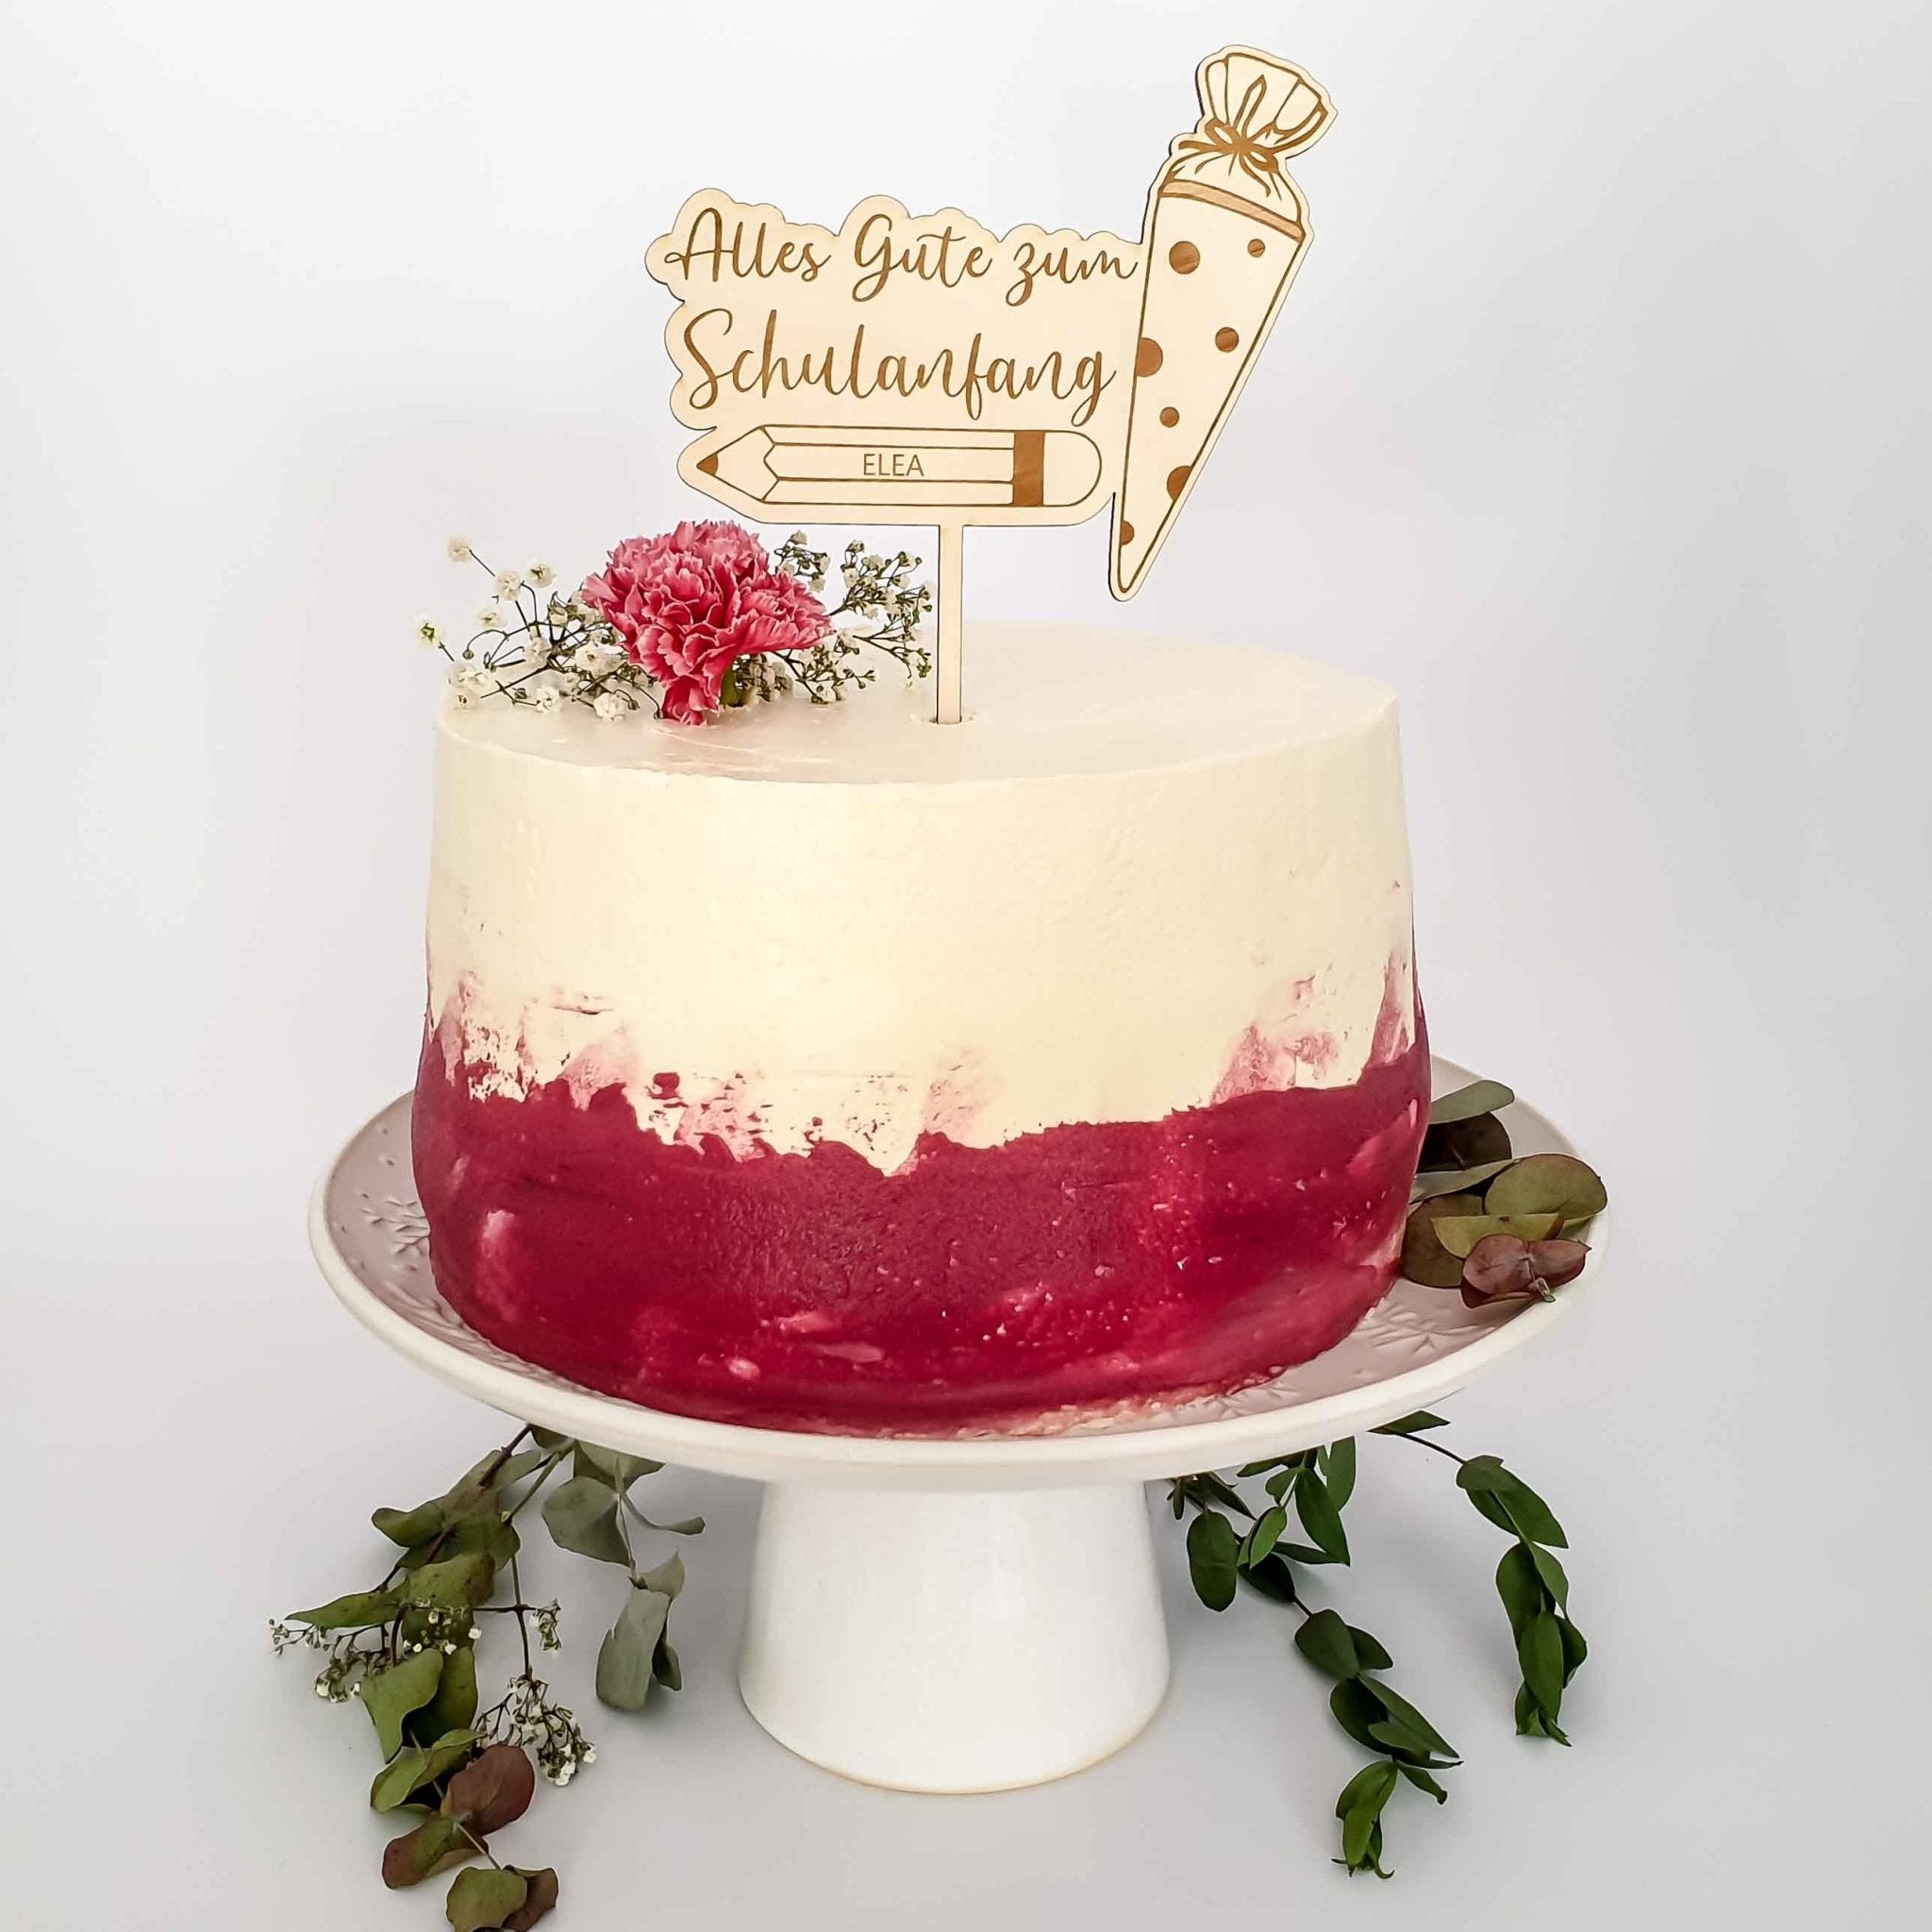 Cake Topper Schulanfang - Suzu Papers